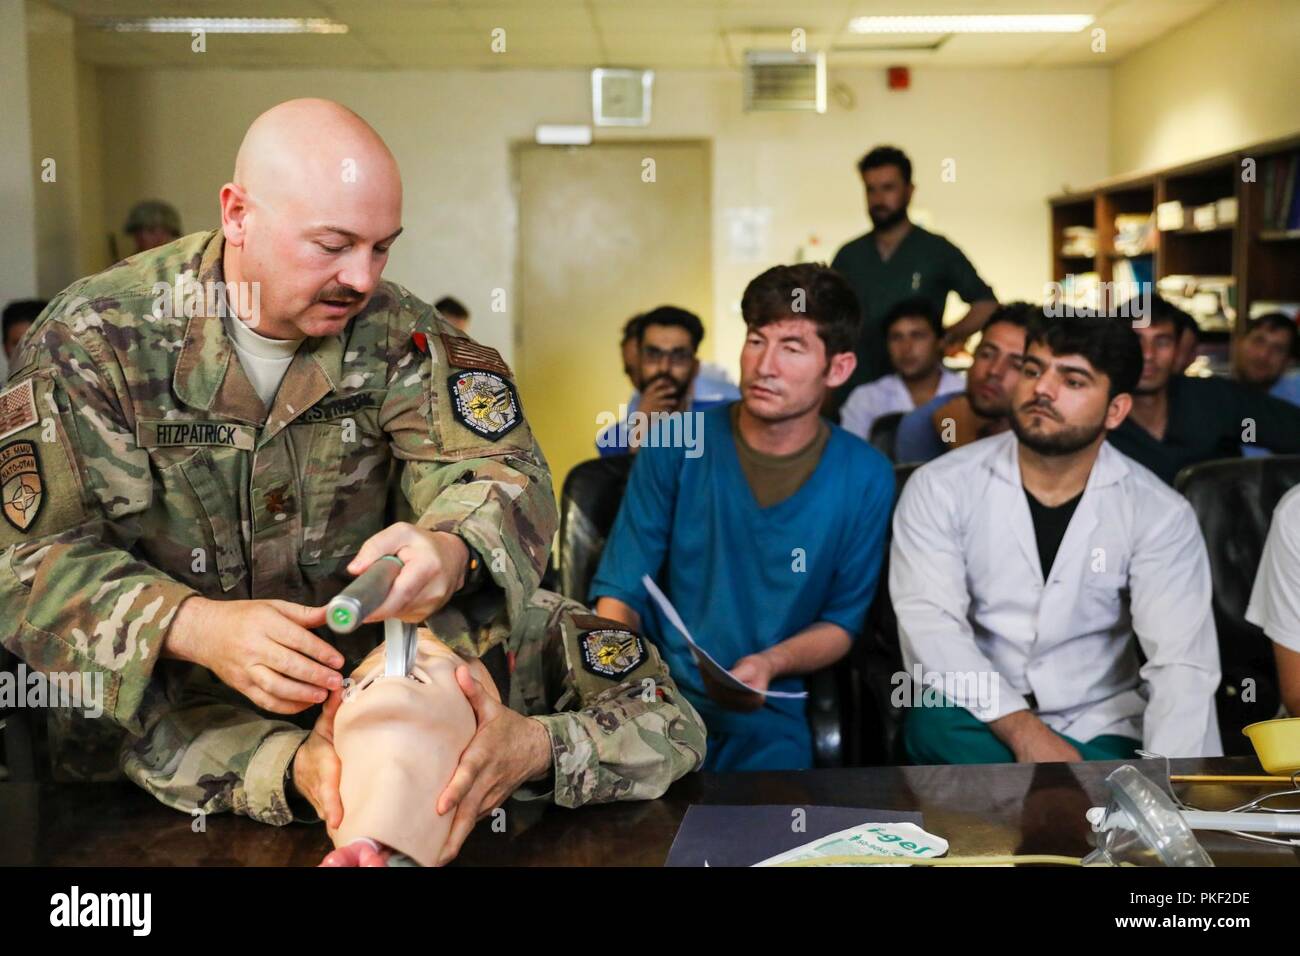 KANDAHAR PROVINCE, Afghanistan (August 5, 2018) --  U.S. Navy Lt. Cdr. Travis J. Fitzpatrick, senior nurse for Kandahar Airfield NATO Role III Multinational Medical Unit, demonstrates a technique on how to clear the airway of a patient, August 5, 2018, to Afghan medical staff members during a medical advisory visit at Kandahar Regional Military Hospital, Camp Hero in Kandahar, Afghanistan. Staff members from the Role III conduct routine visits to KRMH to train and advise Afghan medical staff. Stock Photo